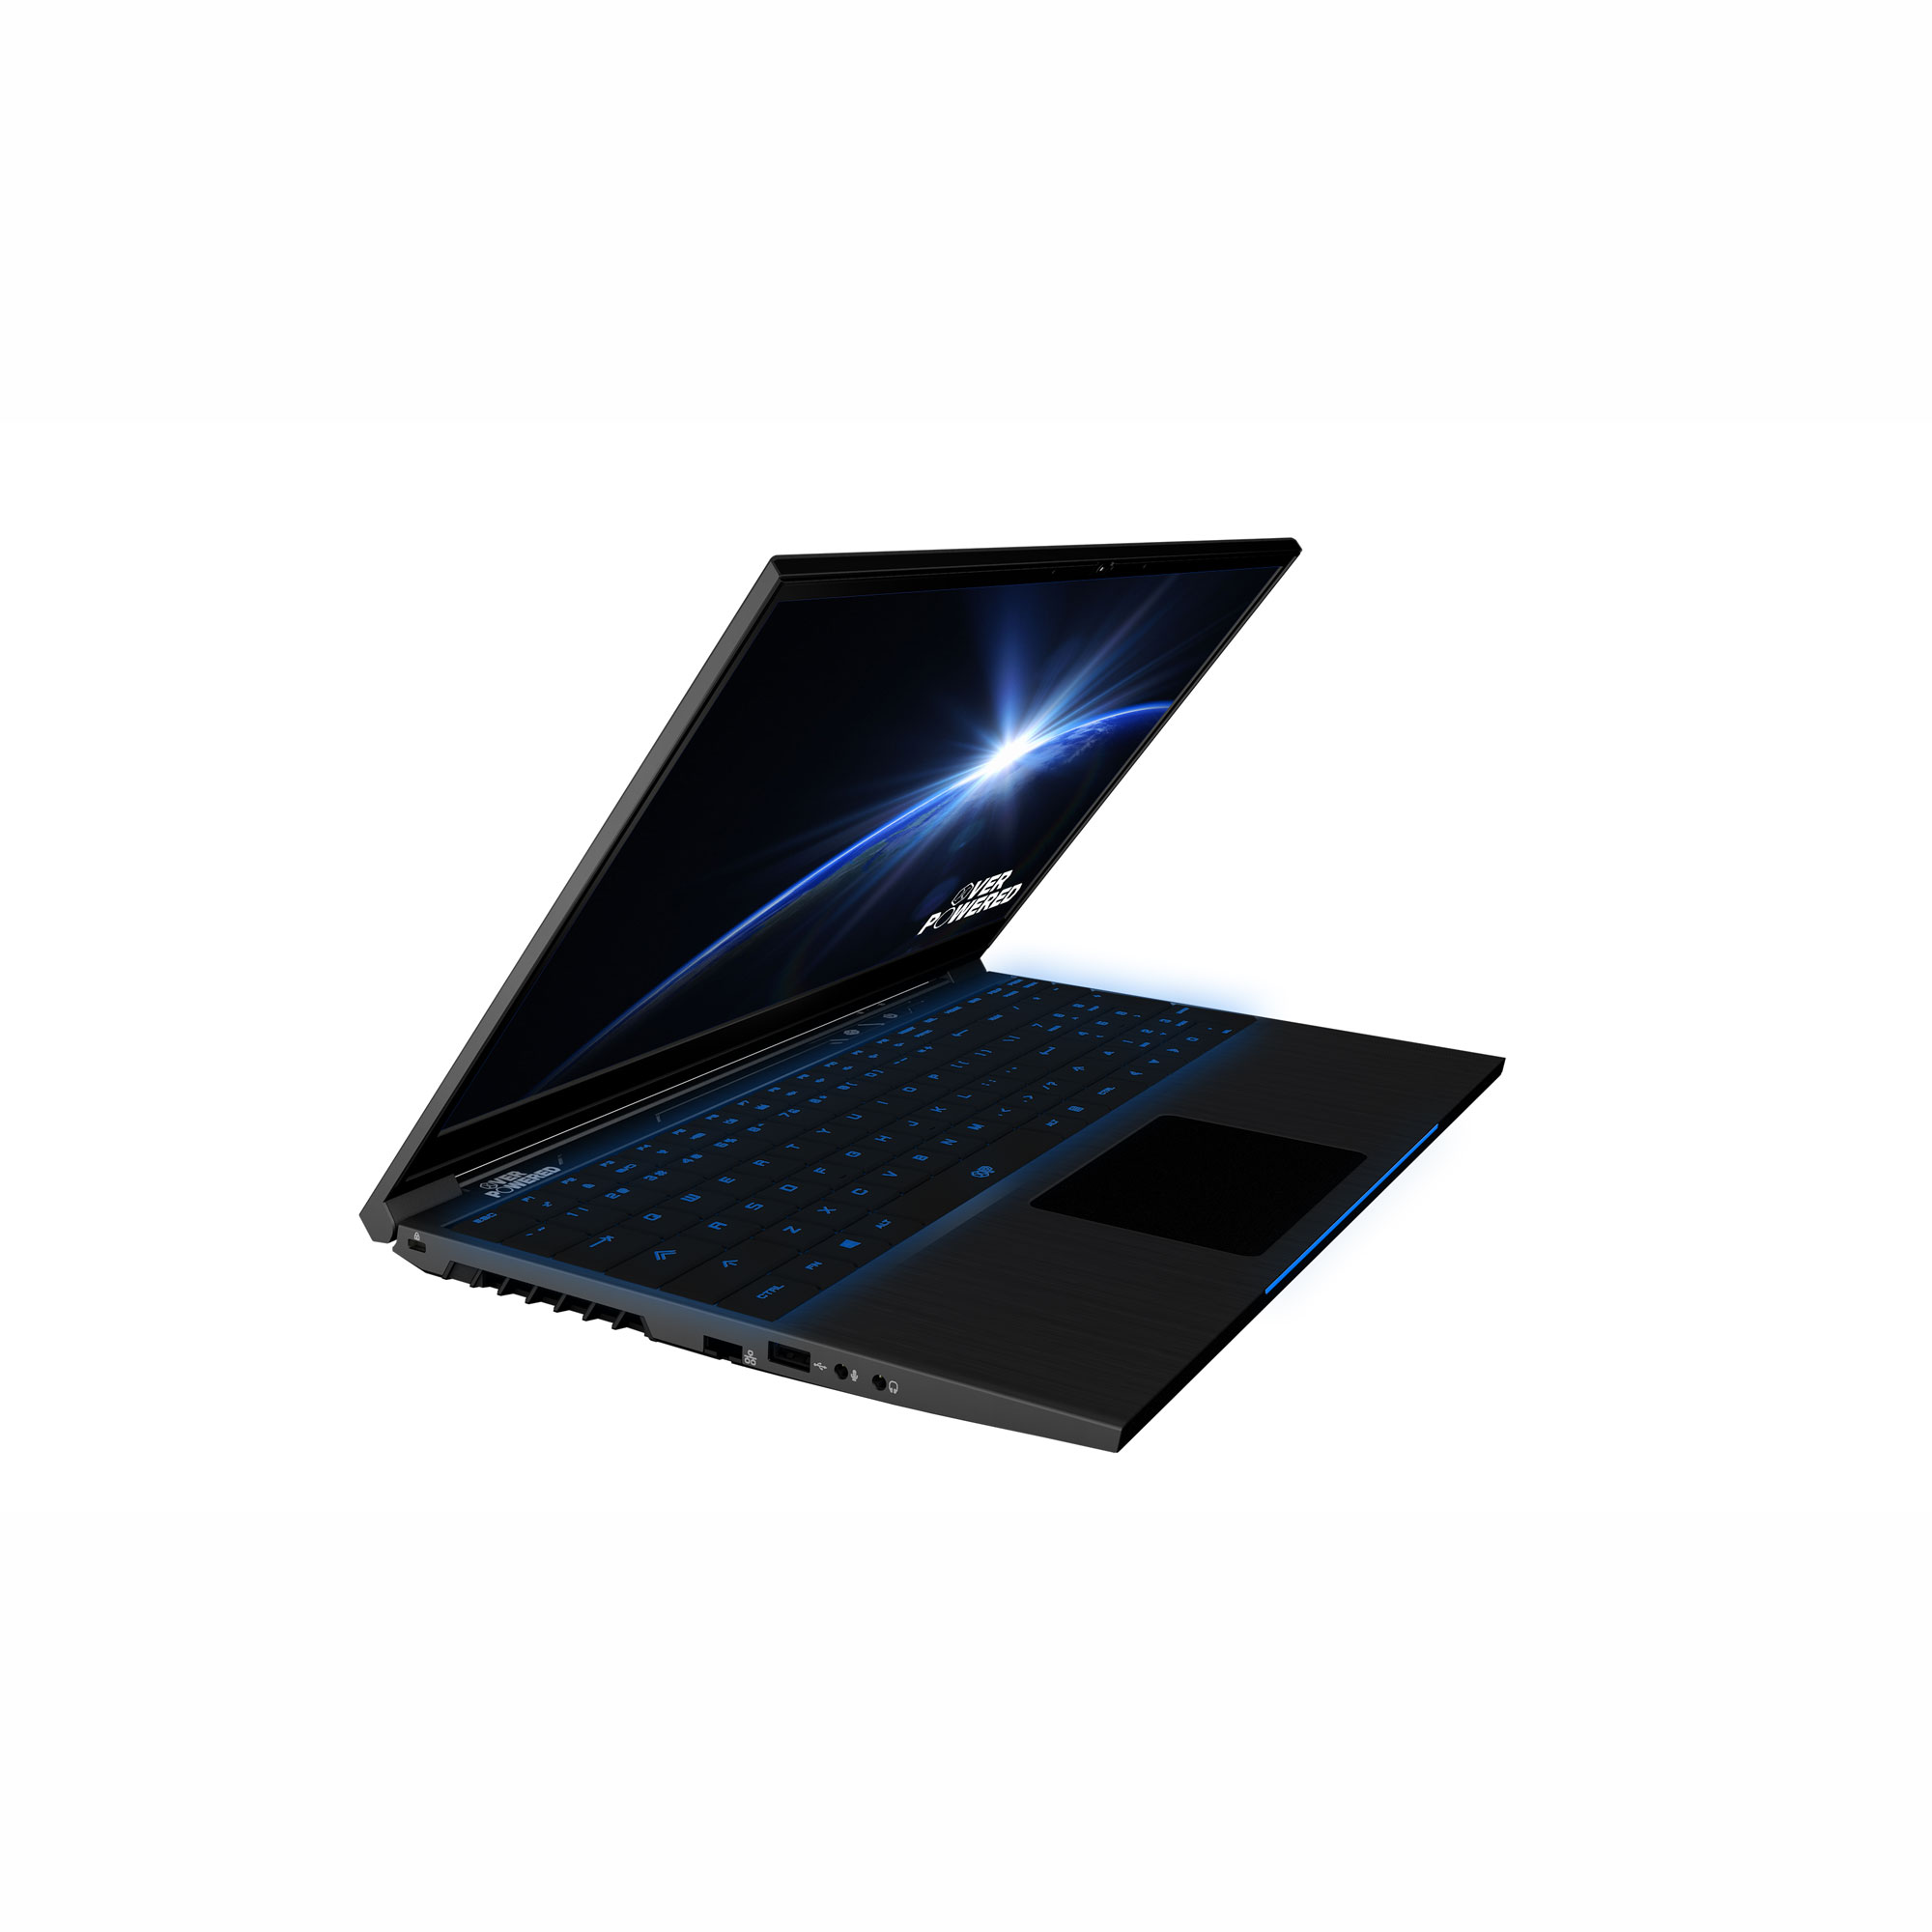 OVERPOWERED Gaming Laptop 15+, 2 Year Warranty, 144Hz, Intel i7-8750H, NVIDIA GeForce GTX 1060, Mechanical LED Keyboard, 256 SSD, 1TB HDD, 16GB RAM, Windows 10 - image 3 of 5